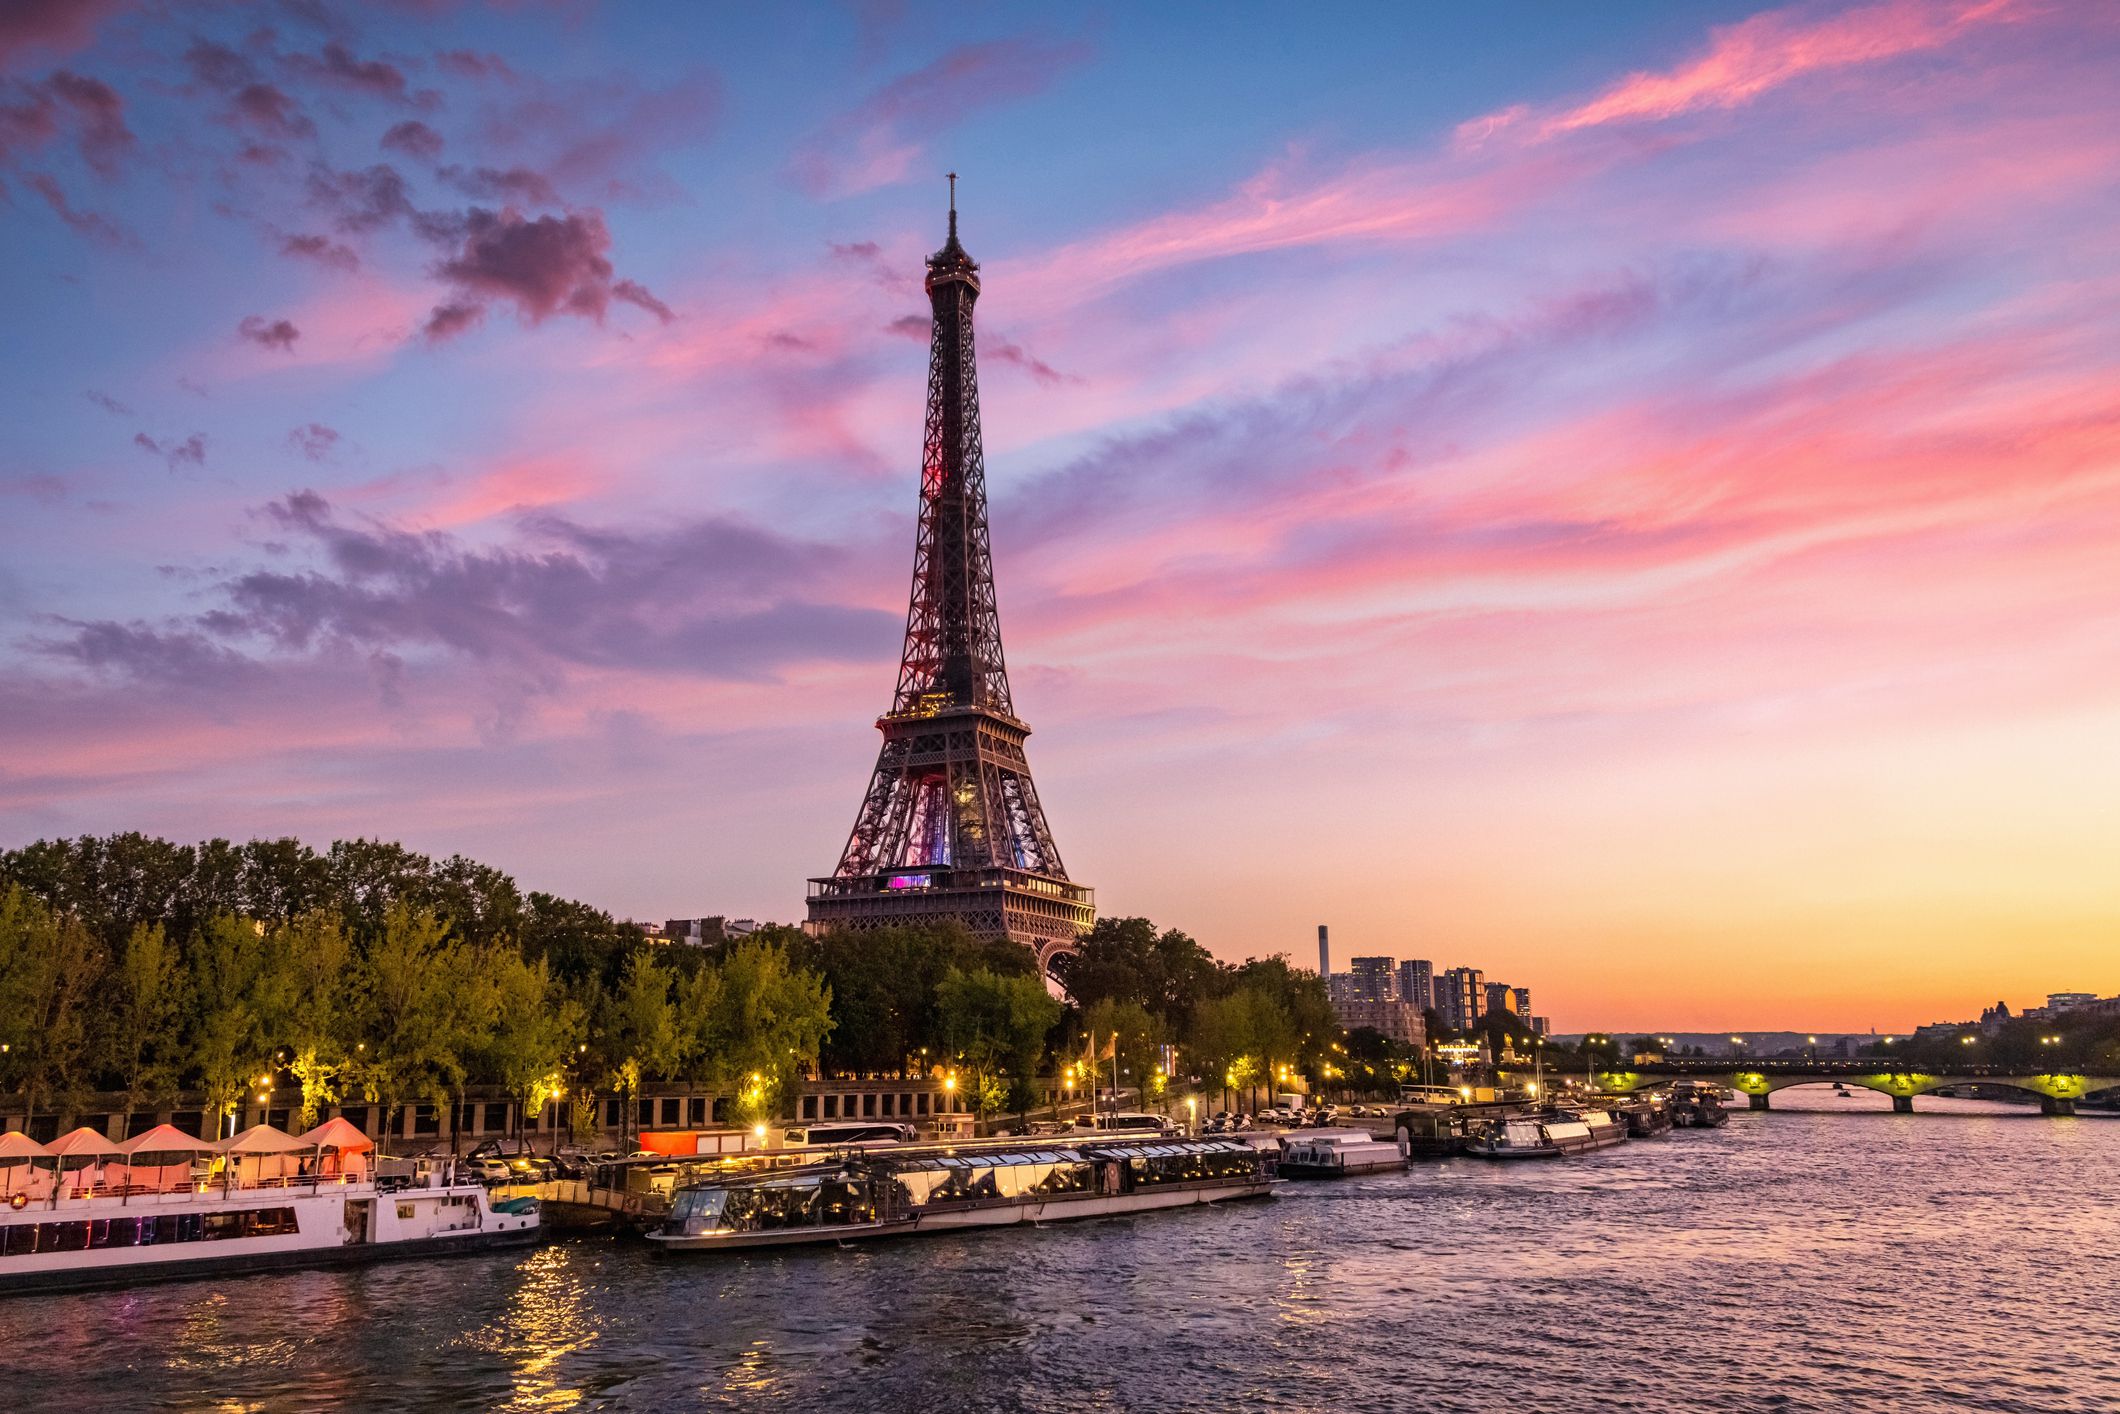 <p><b>Average cost of a hotel per night: </b>$242.55</p><p><b>Average cost of an Airbnb per night: </b>$131.17</p><p>The Eiffel Tower, the Louvre, and the Notre Dame Cathedral can all be found in the same destination: Paris. The city exudes a romantic, dreamy aura that draws tons of tourists year-round.</p>